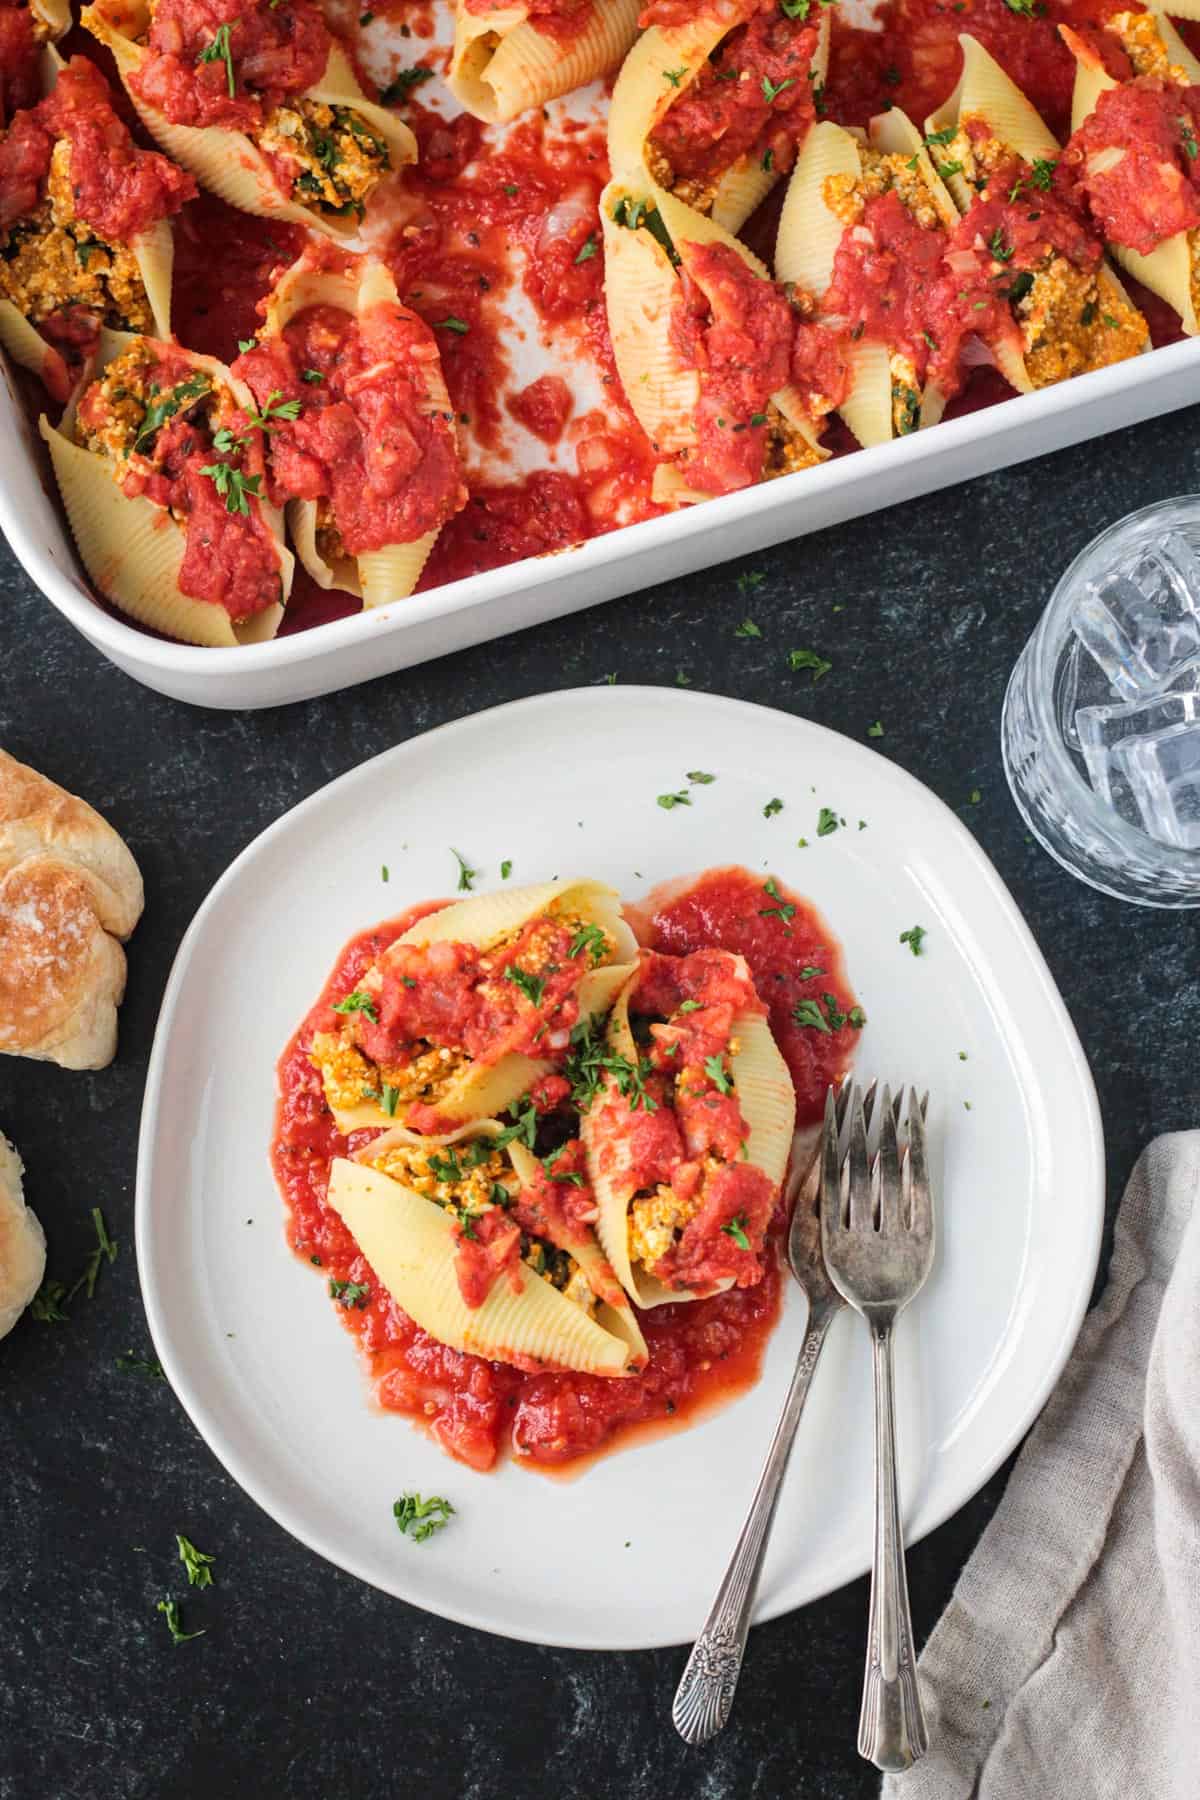 Three vegan stuffed shells on a plate with two forks.